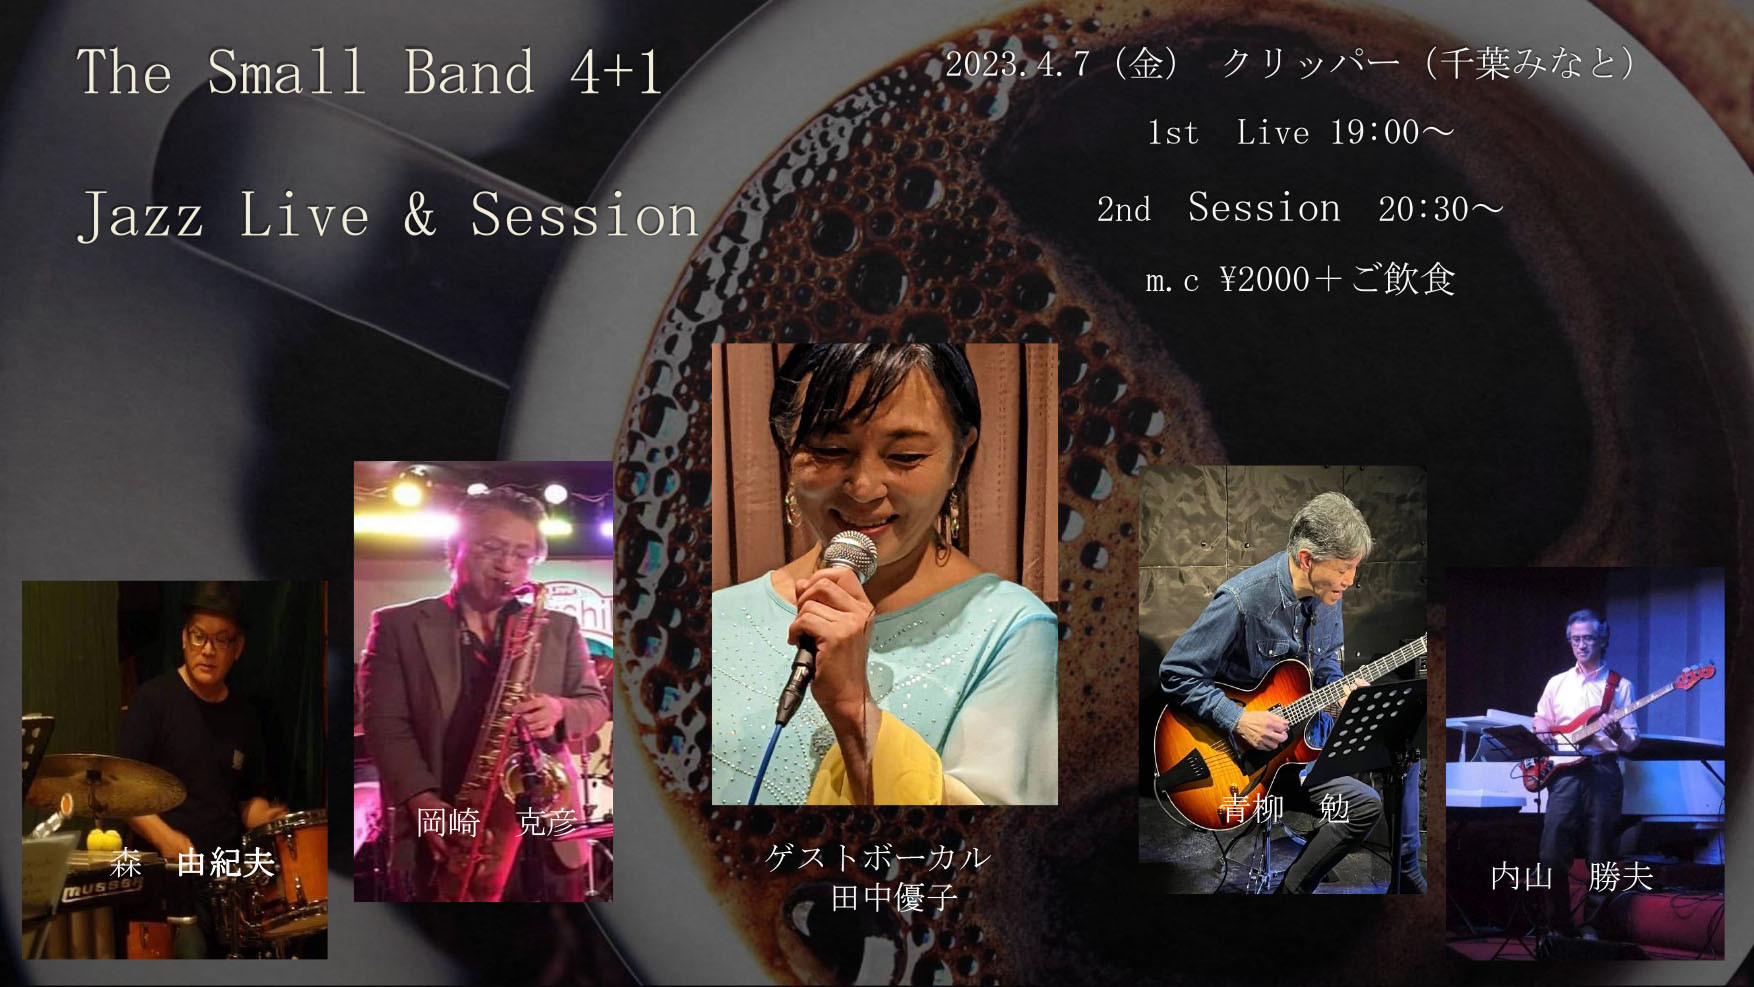 The Small Band 4 + 1 Live & Session